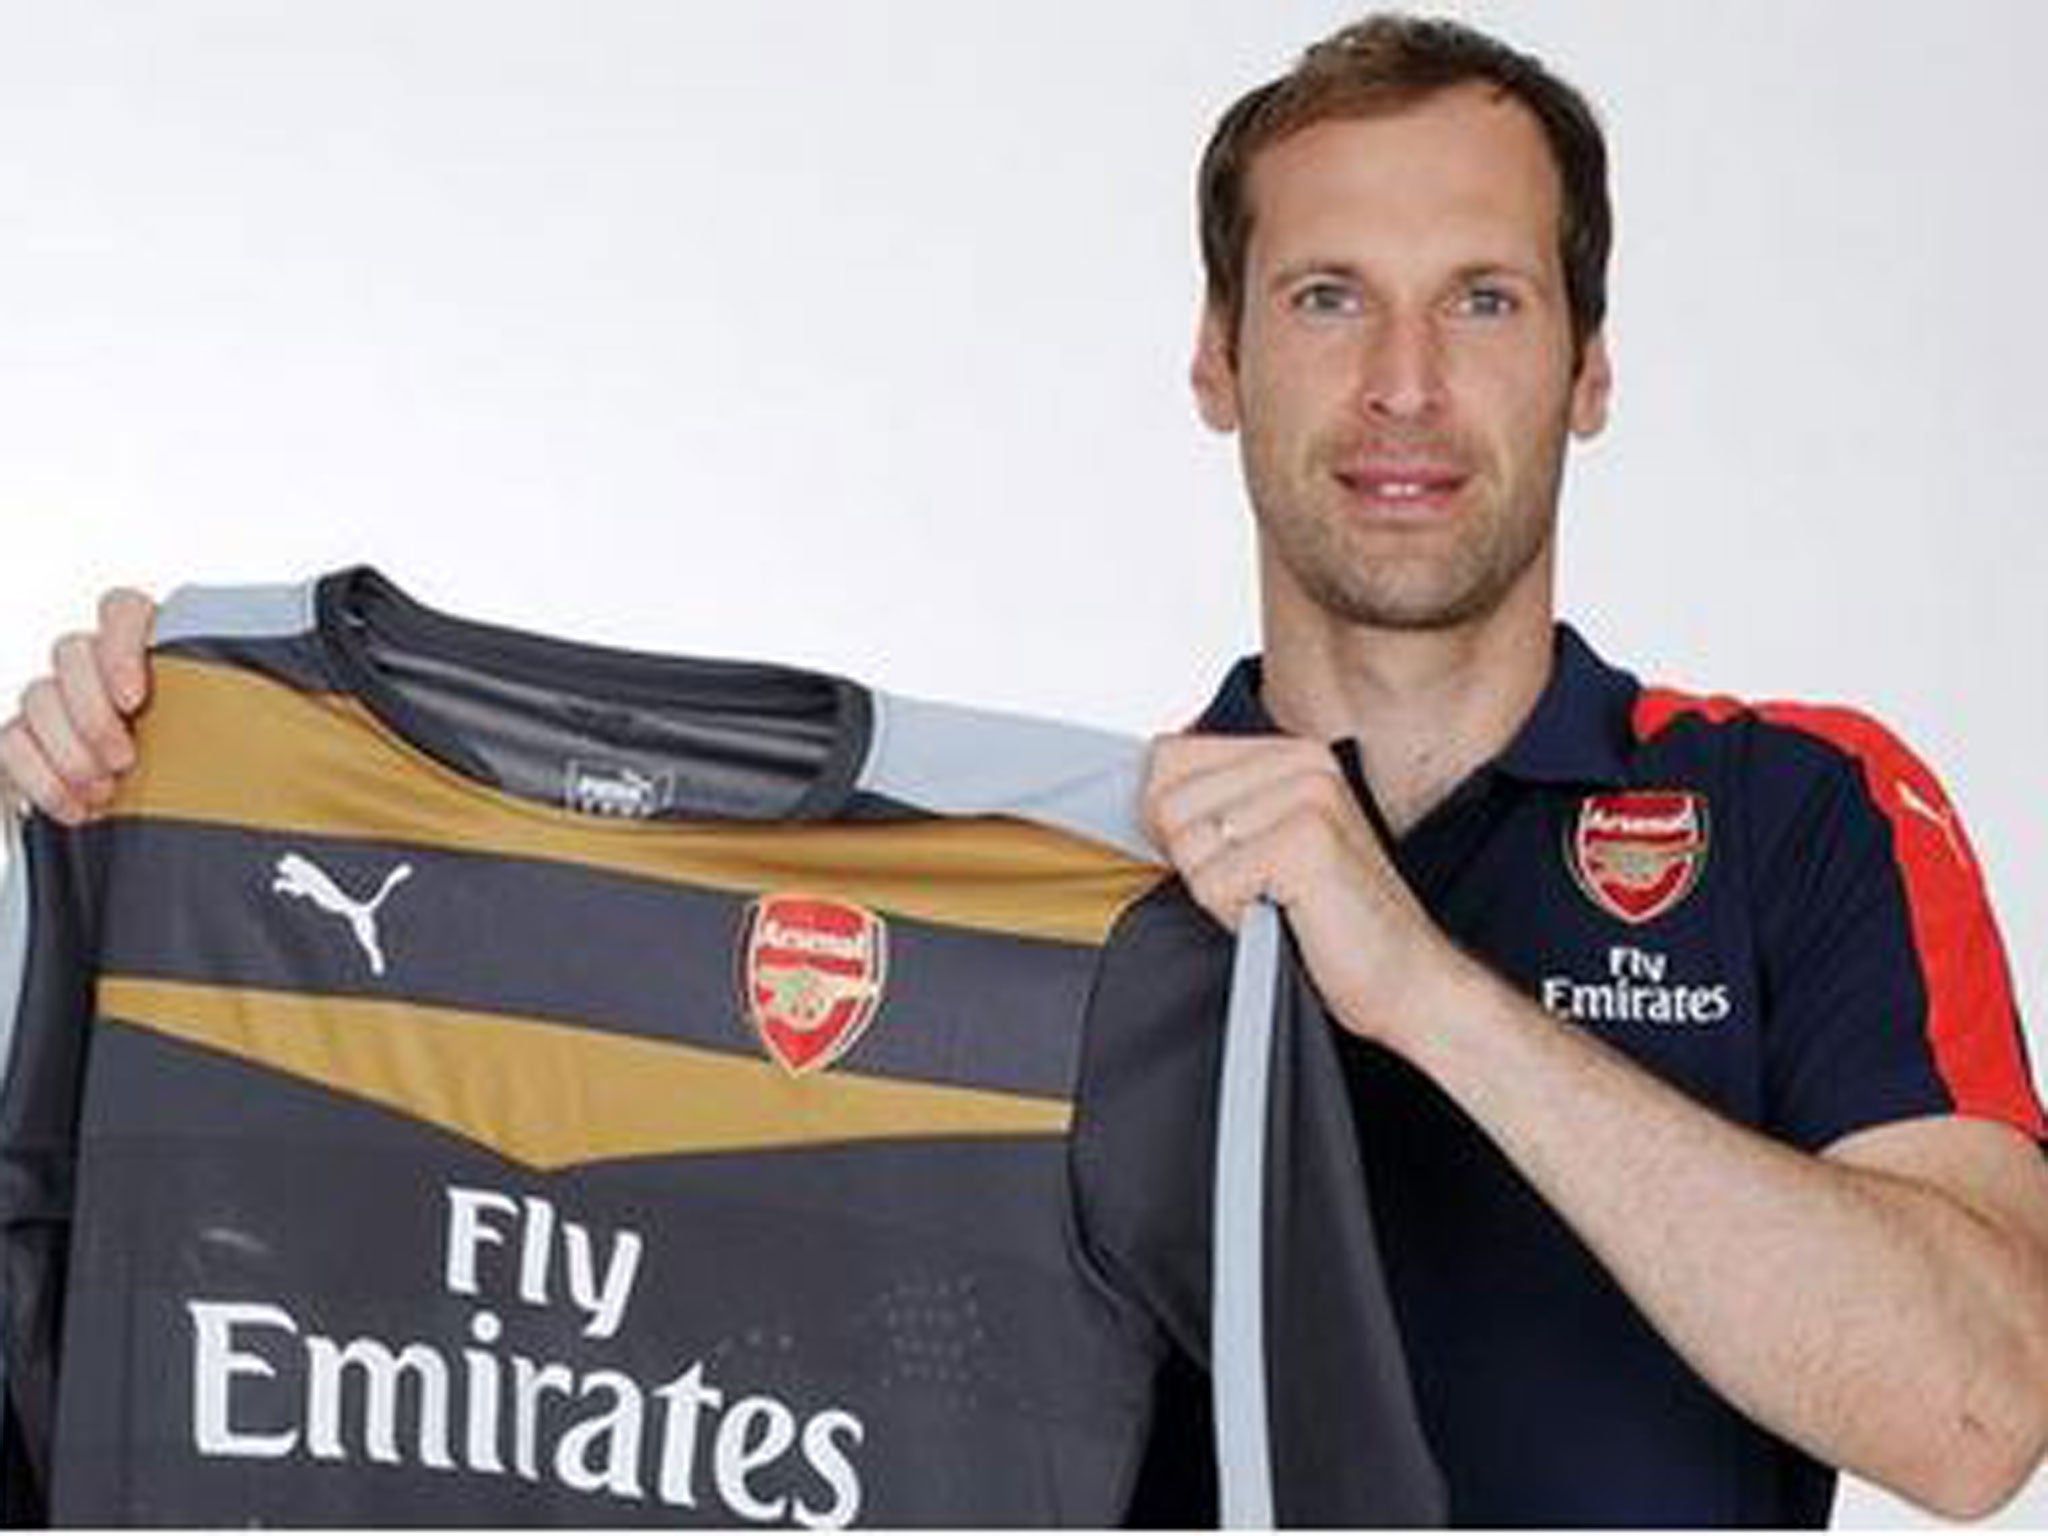 Cech has announced he has joined Arsenal